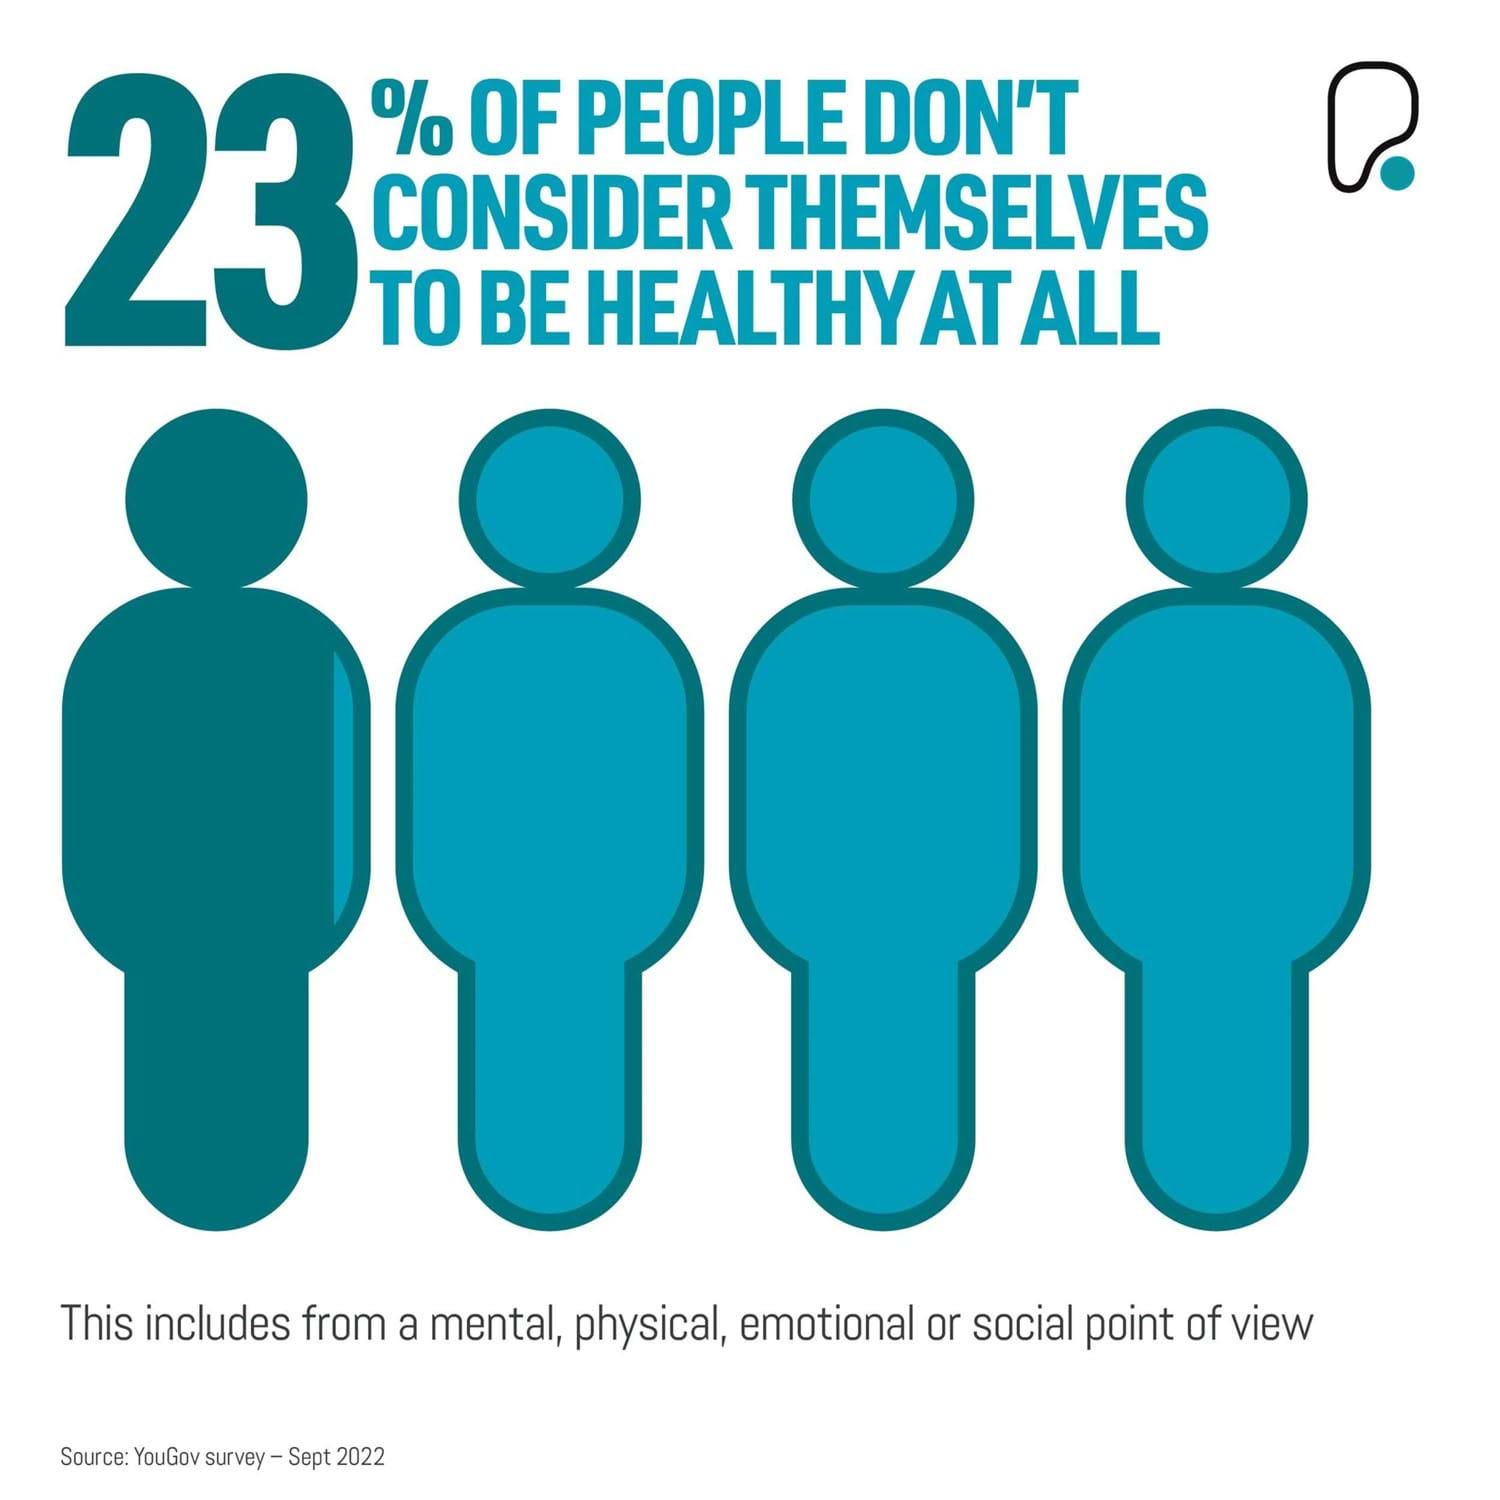 23% of people don't consider themselves to be healthy